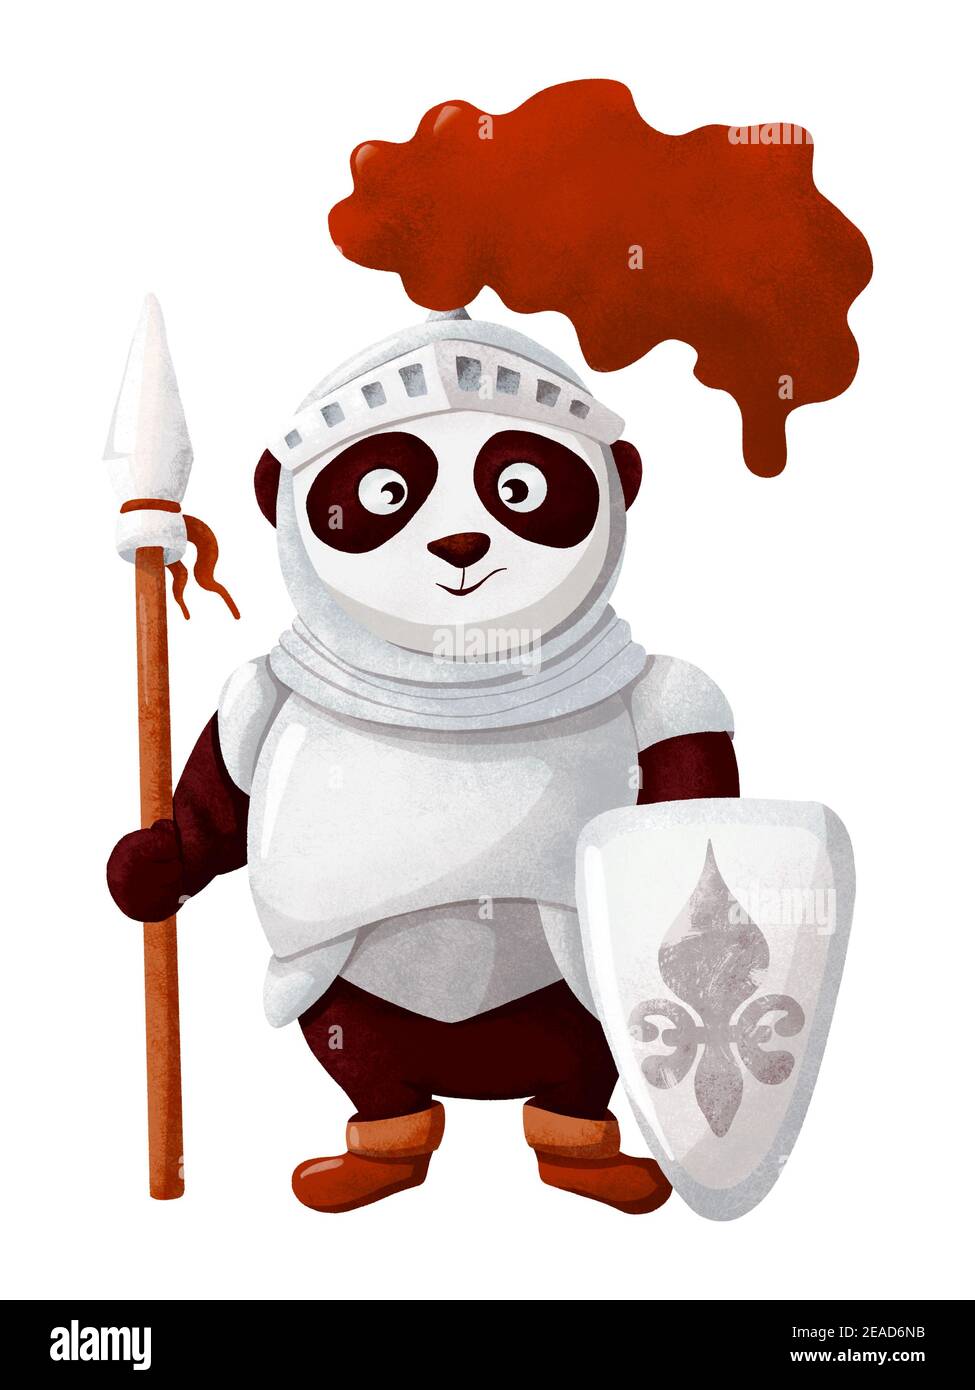 Panda knight with spear and French lily symbol on shield Stock Photo